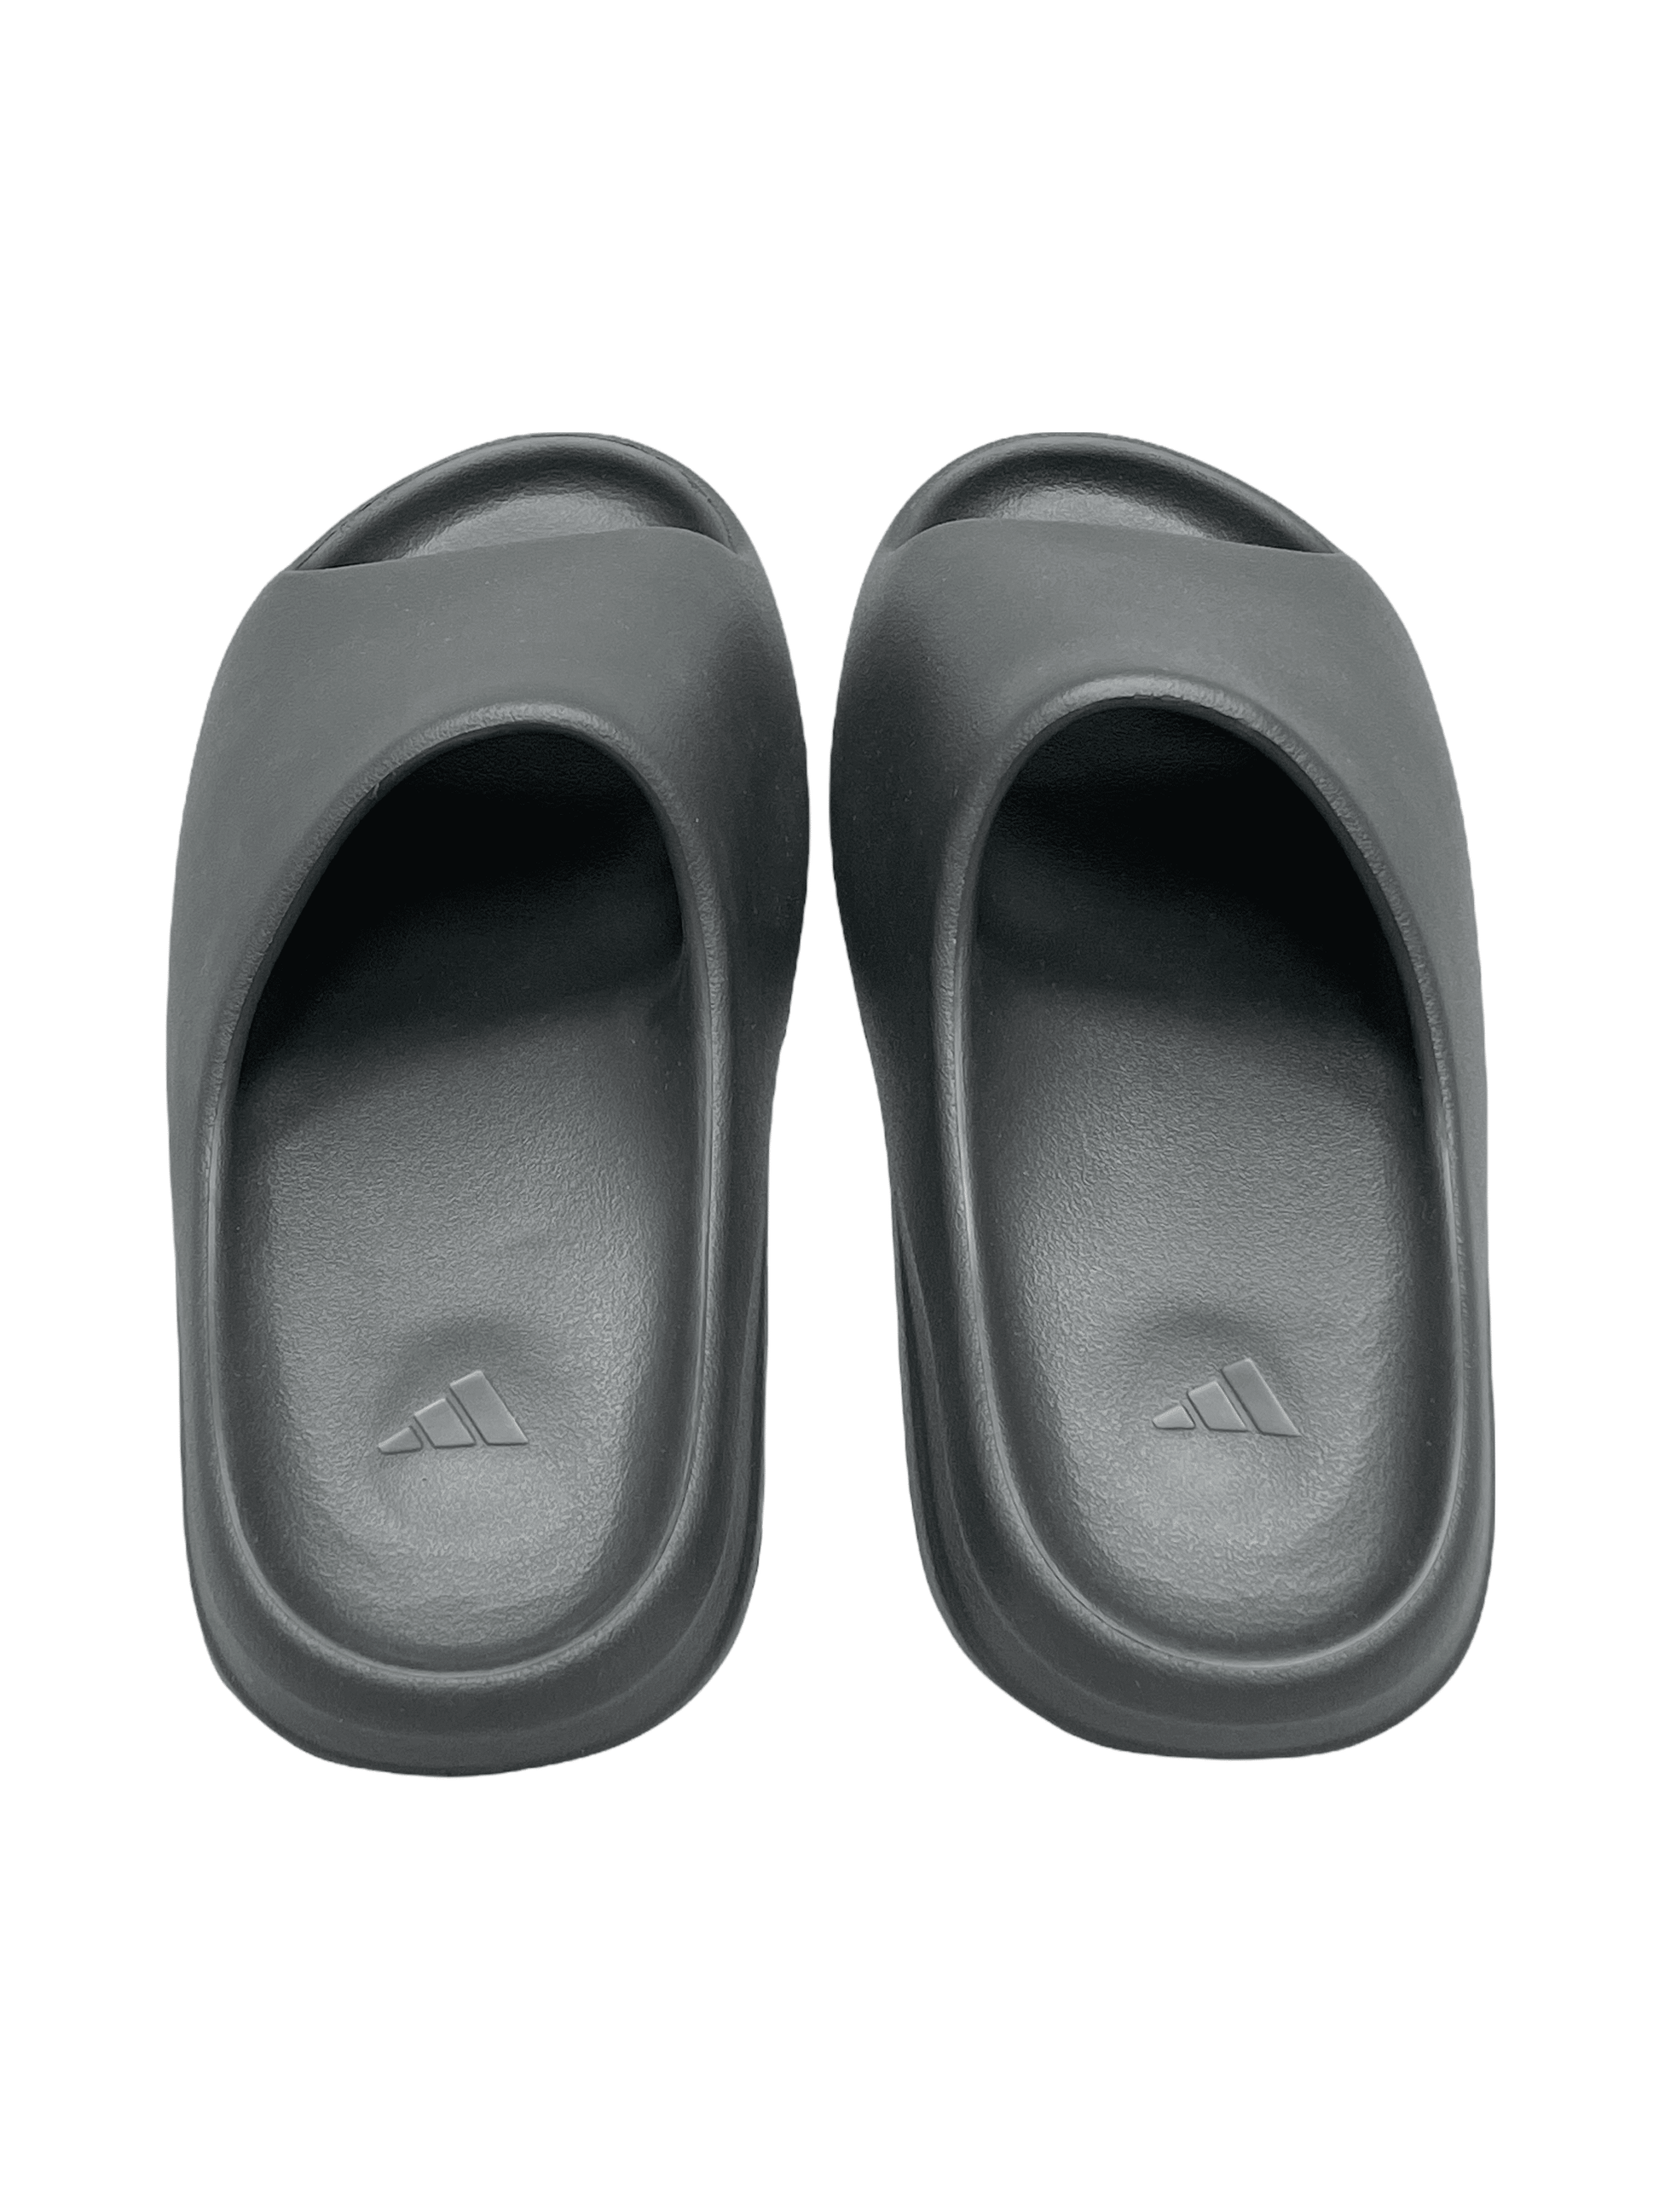 Adidas Yeezy Slide Onyx - Genuine Design Luxury Consignment for Men. New & Pre-Owned Clothing, Shoes, & Accessories. Calgary, Canada